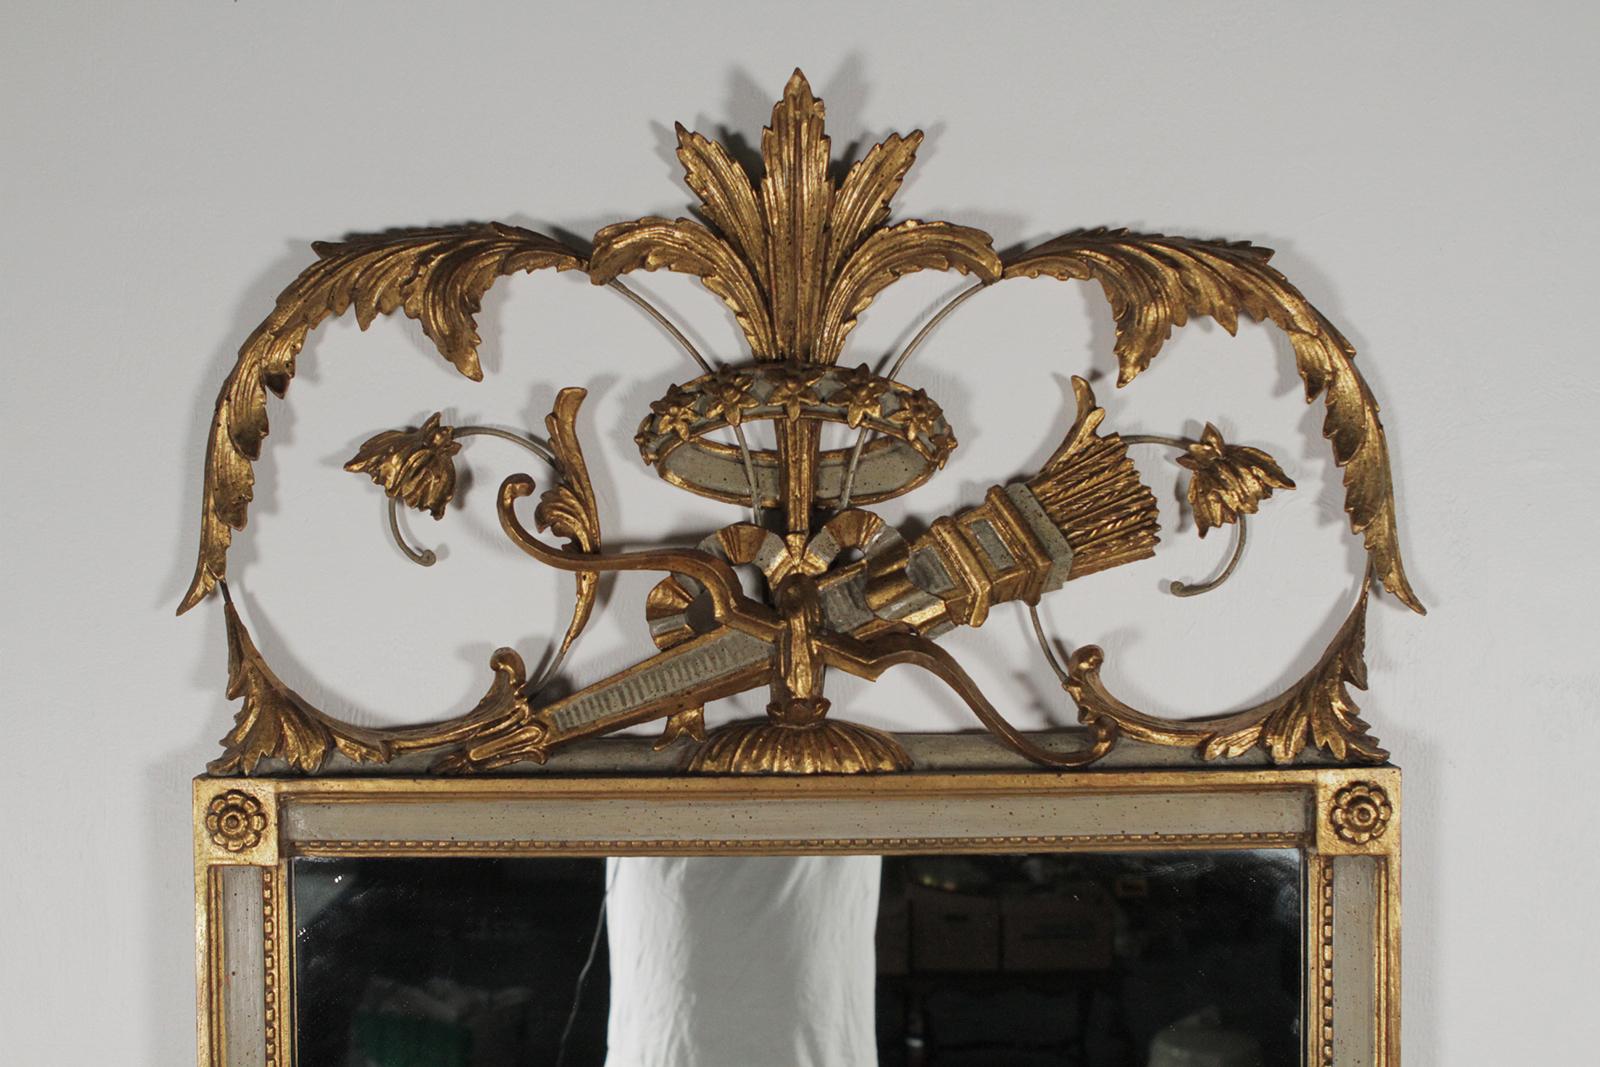 Beautiful French Louis XVI style gold gilt and painted decorative mirror
By Friedman Brothers.